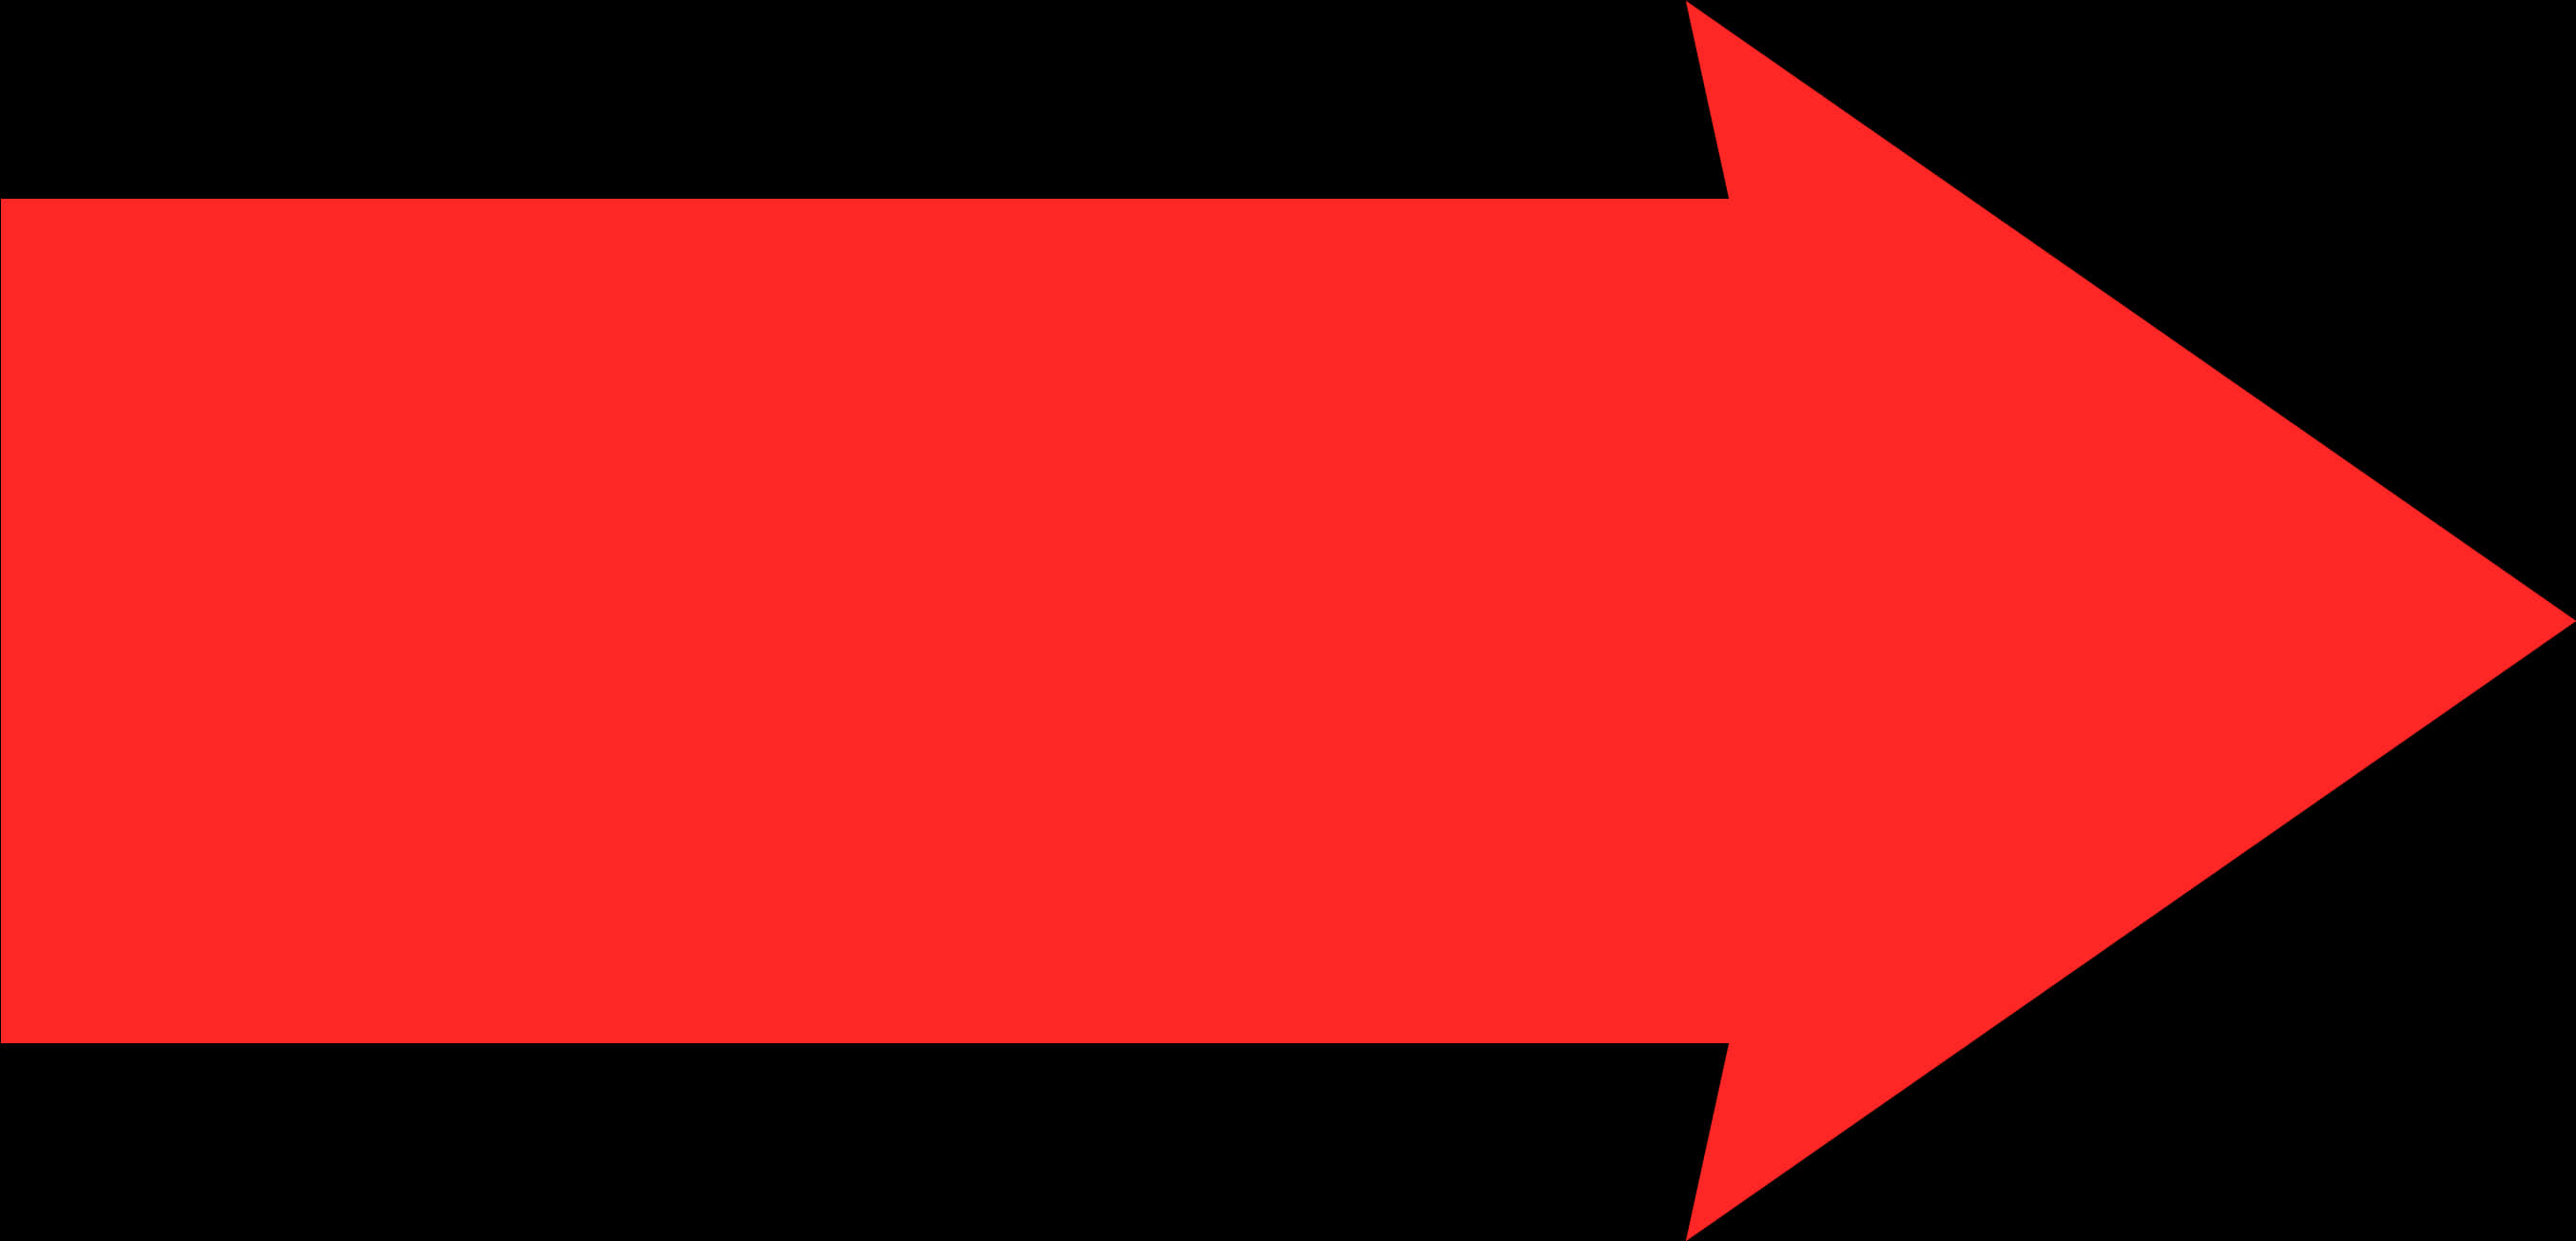 Red Black Arrow Graphic PNG image